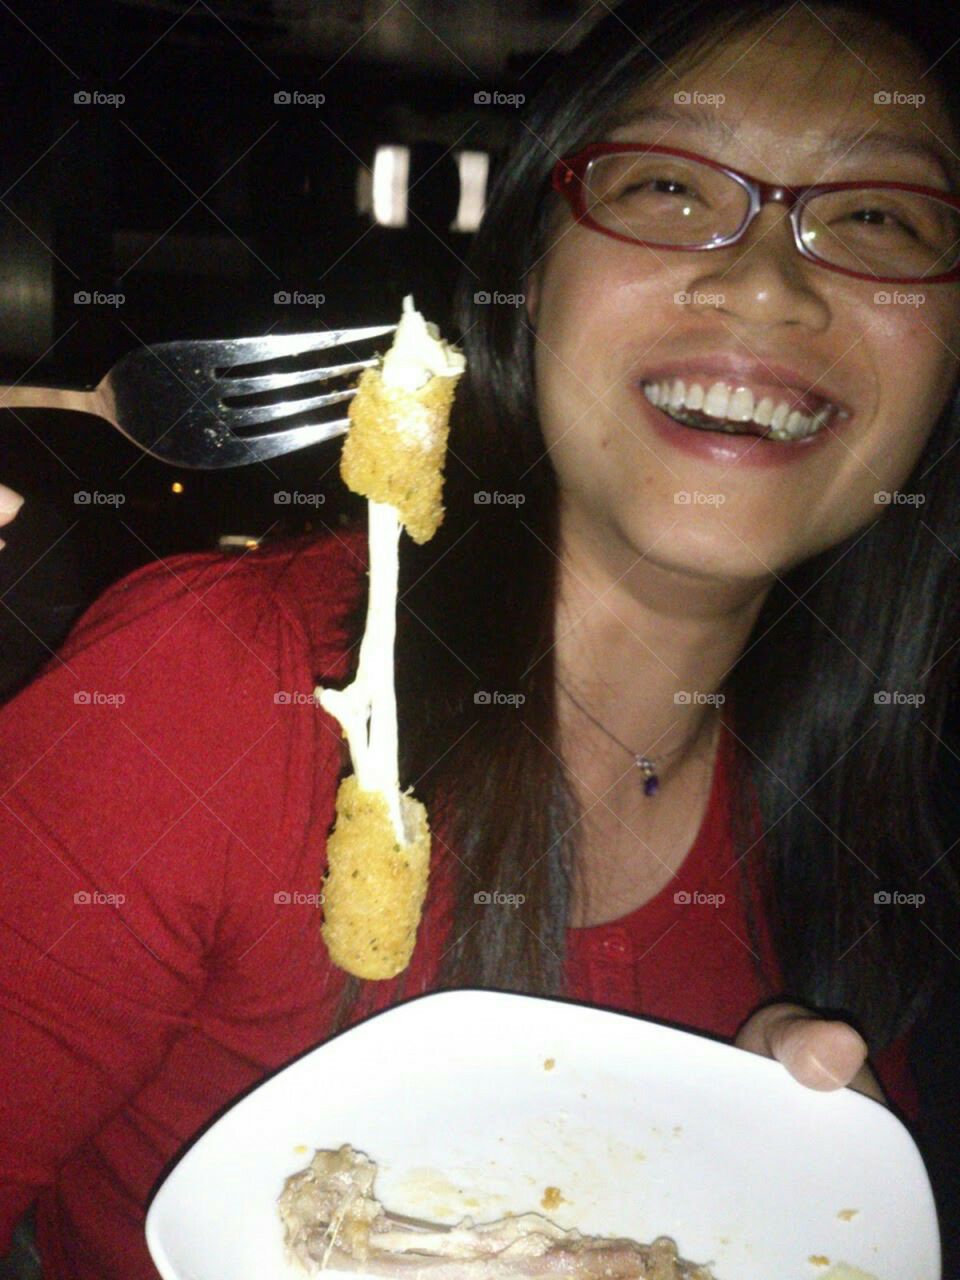 Dinner with Friends. Funny cheese stick